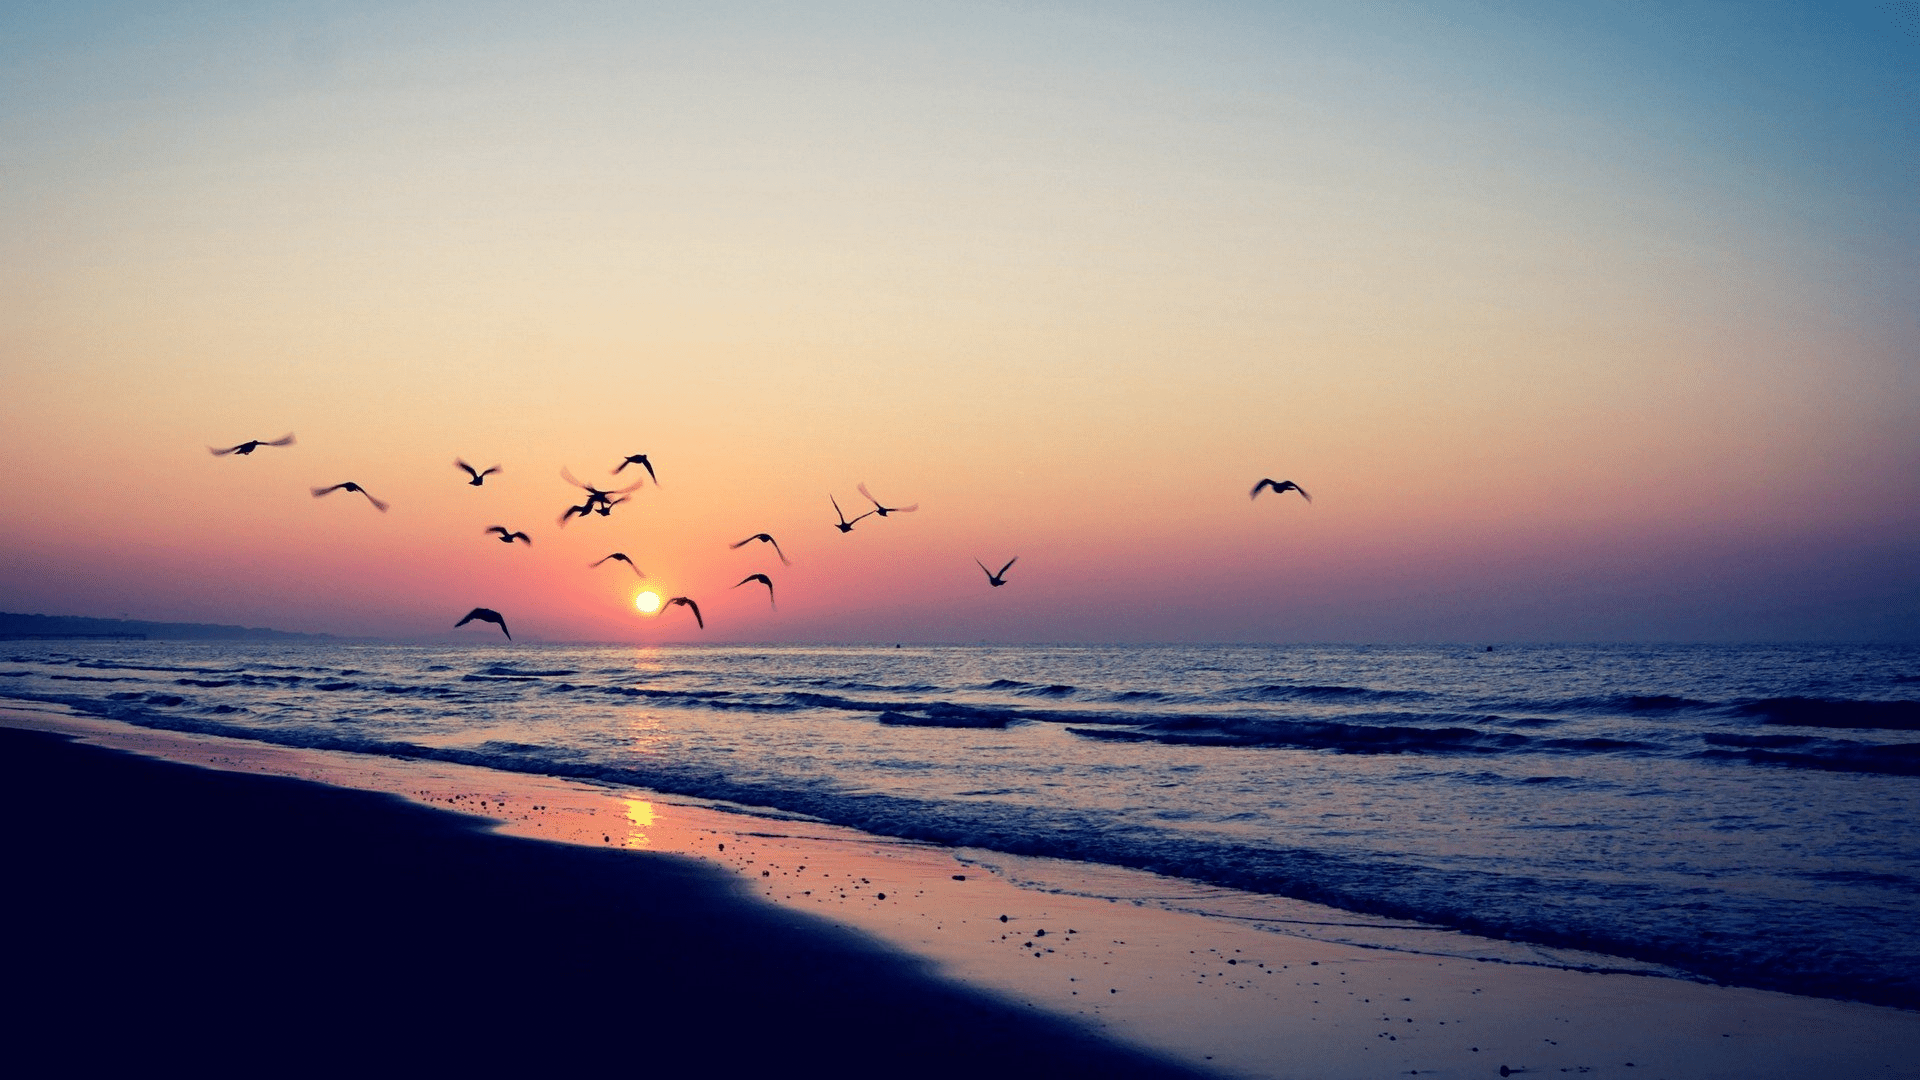 Aesthetic Wallpaper HD Free Download I With You, Download Wallpaper